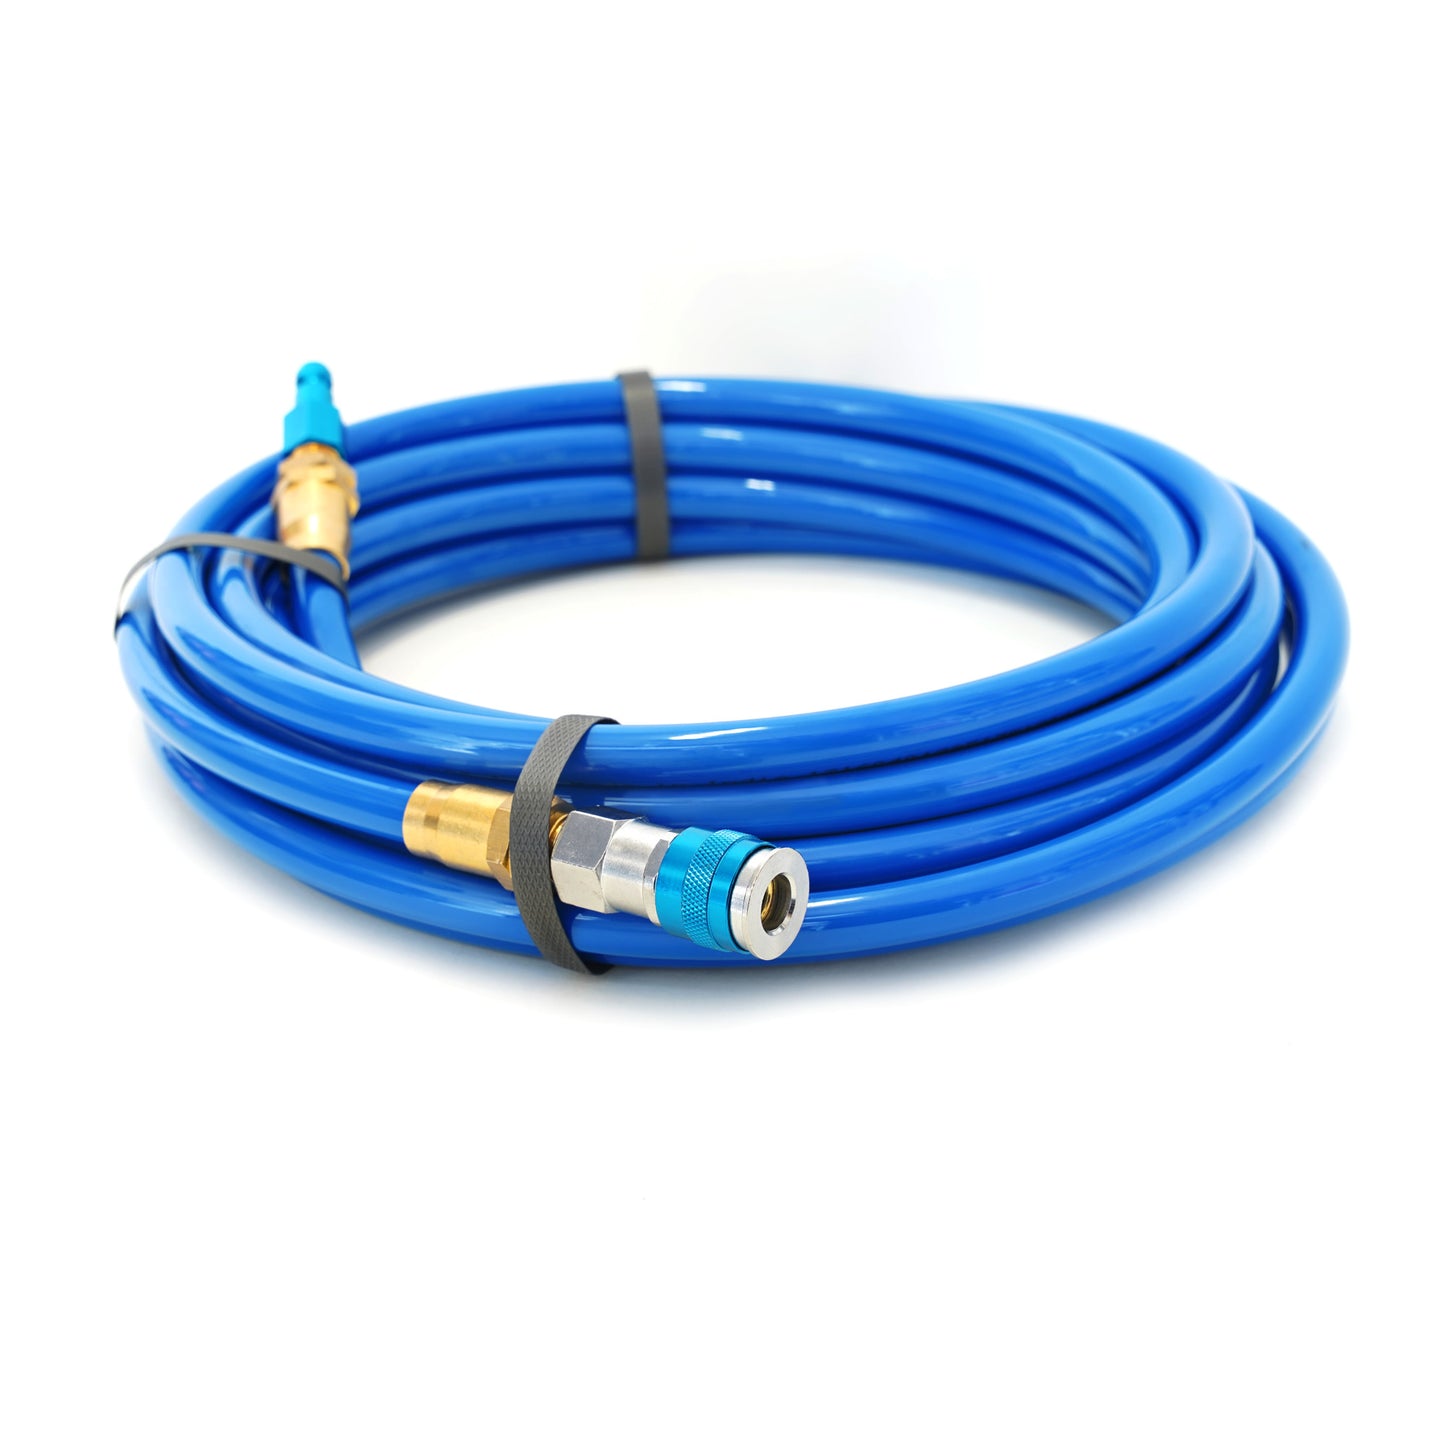 25-feet and 3/8-inch ID abrasion-resistant polyurethane hose with reuseable 1/4-inch NPT brass and quick connect fittings.